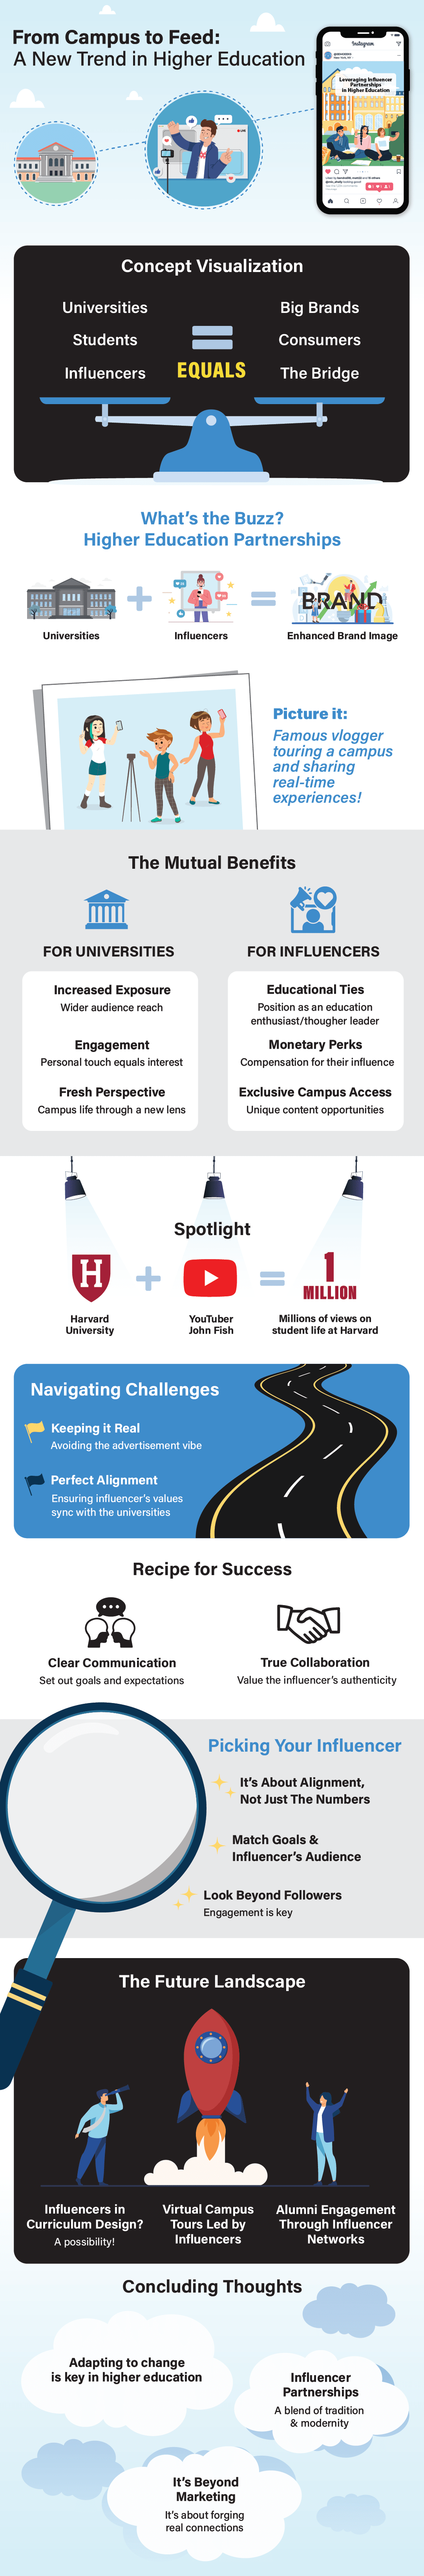 Influencer partnerships in Higher Education | Semgeeks Infographic